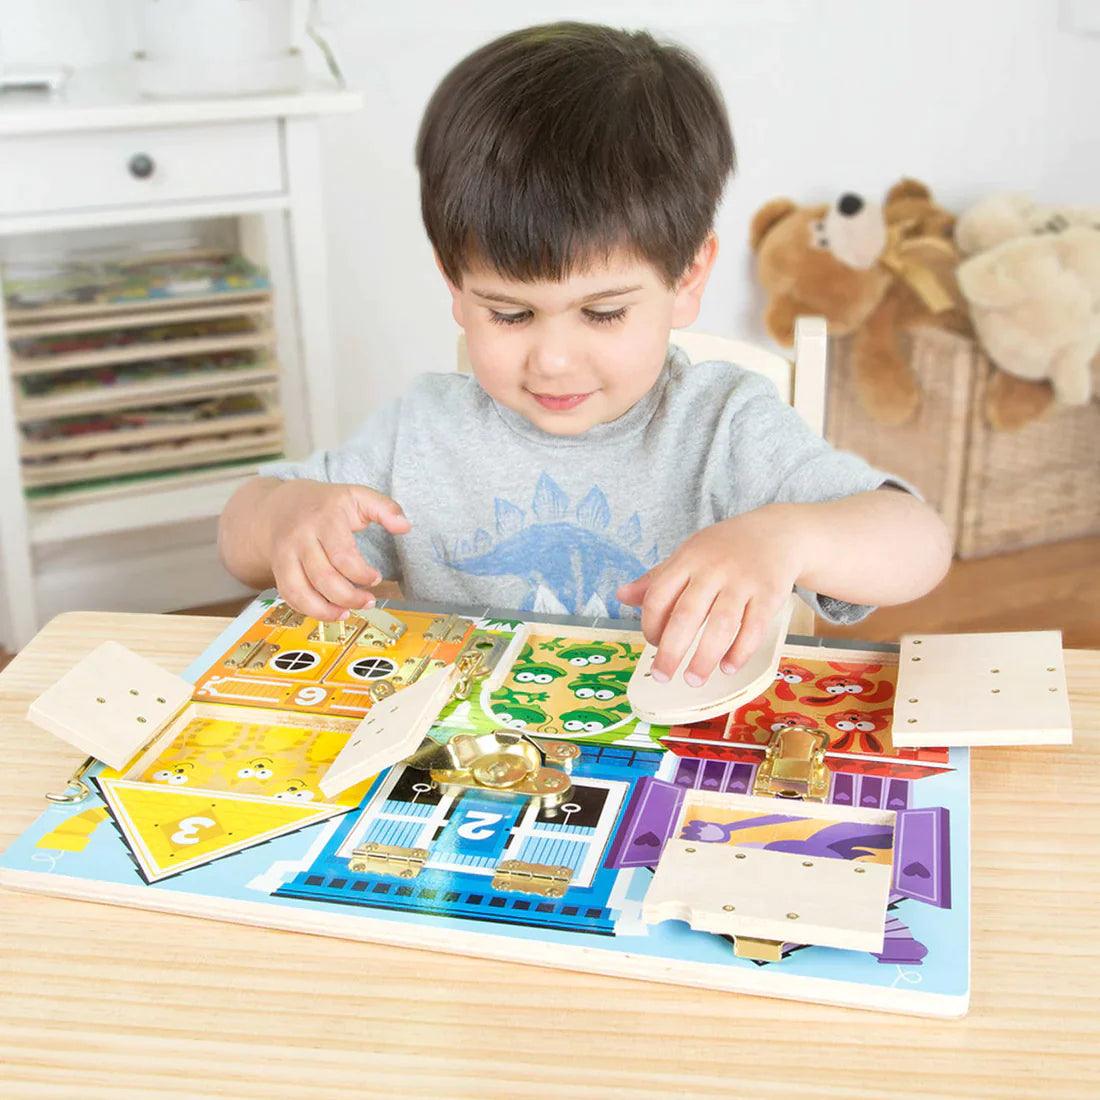 Melissa & Doug: Latches Board manipulative board with locks and latches - Kidealo